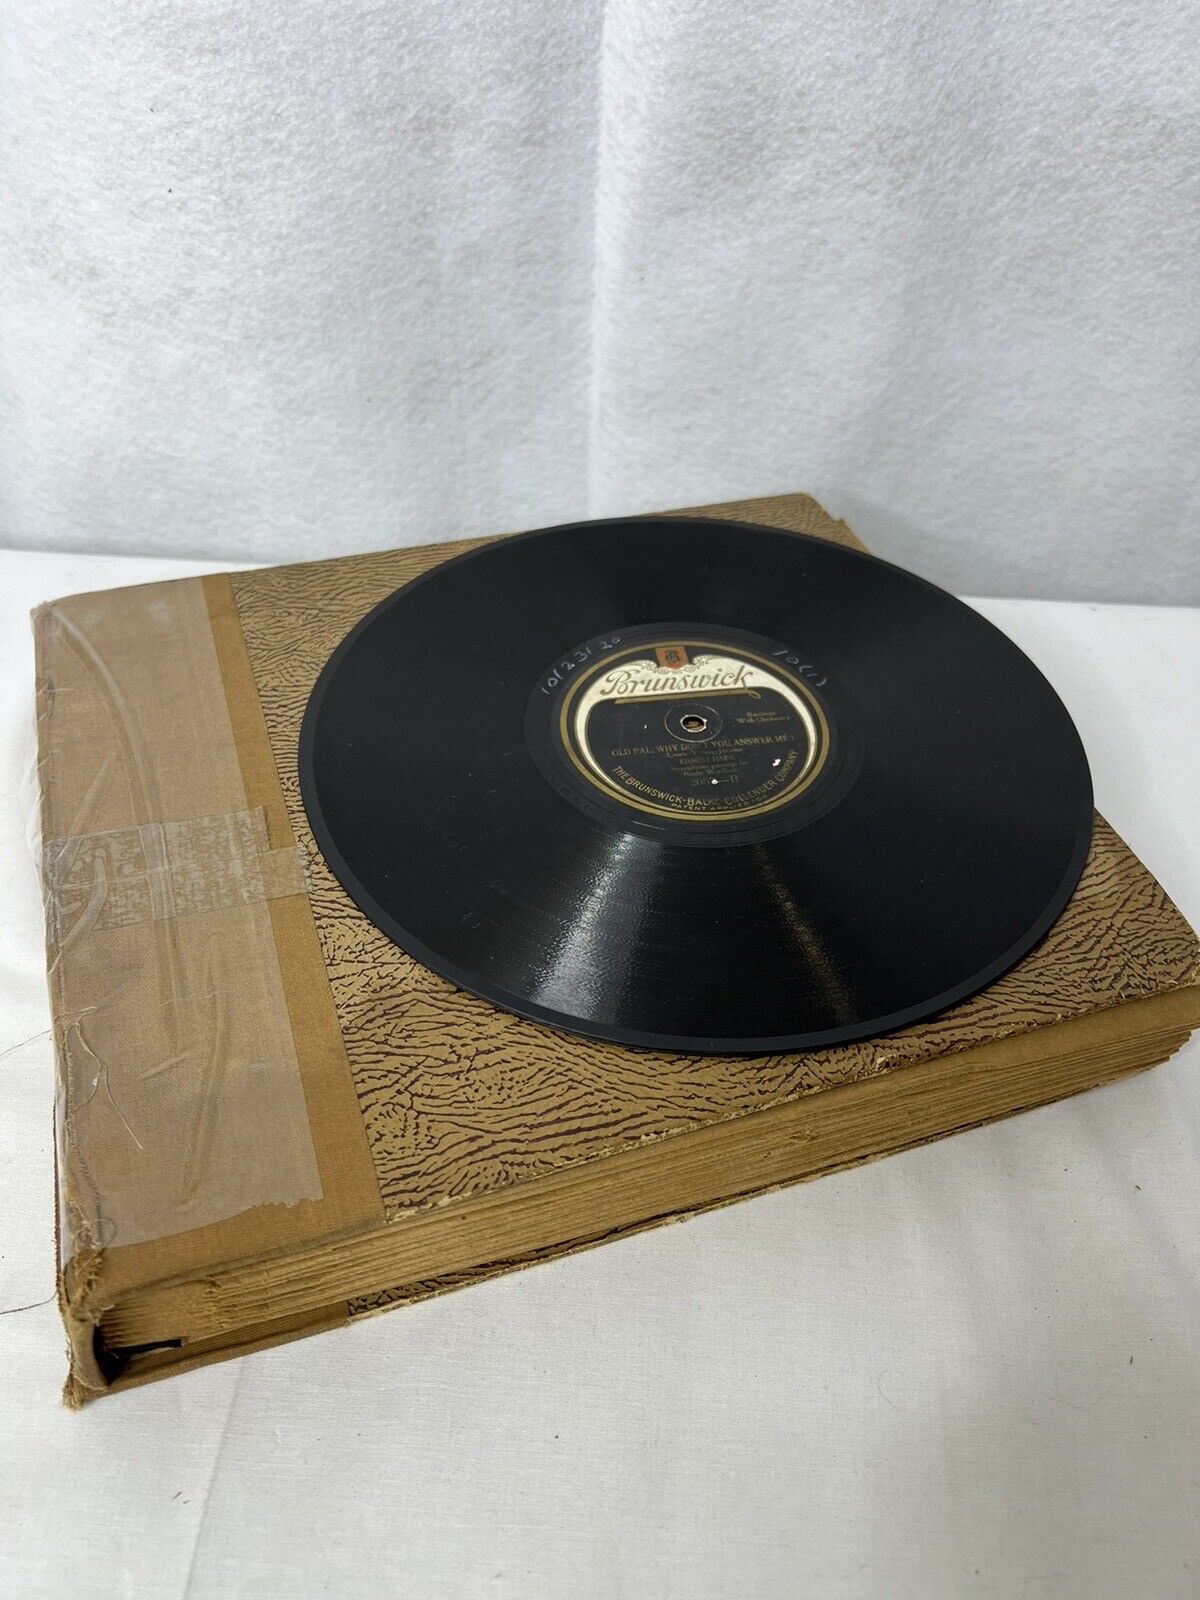 Lot of 12 Antique 1920-21 Records 78 RPM Shellac Vinyl Two-Sided Dated Collecton